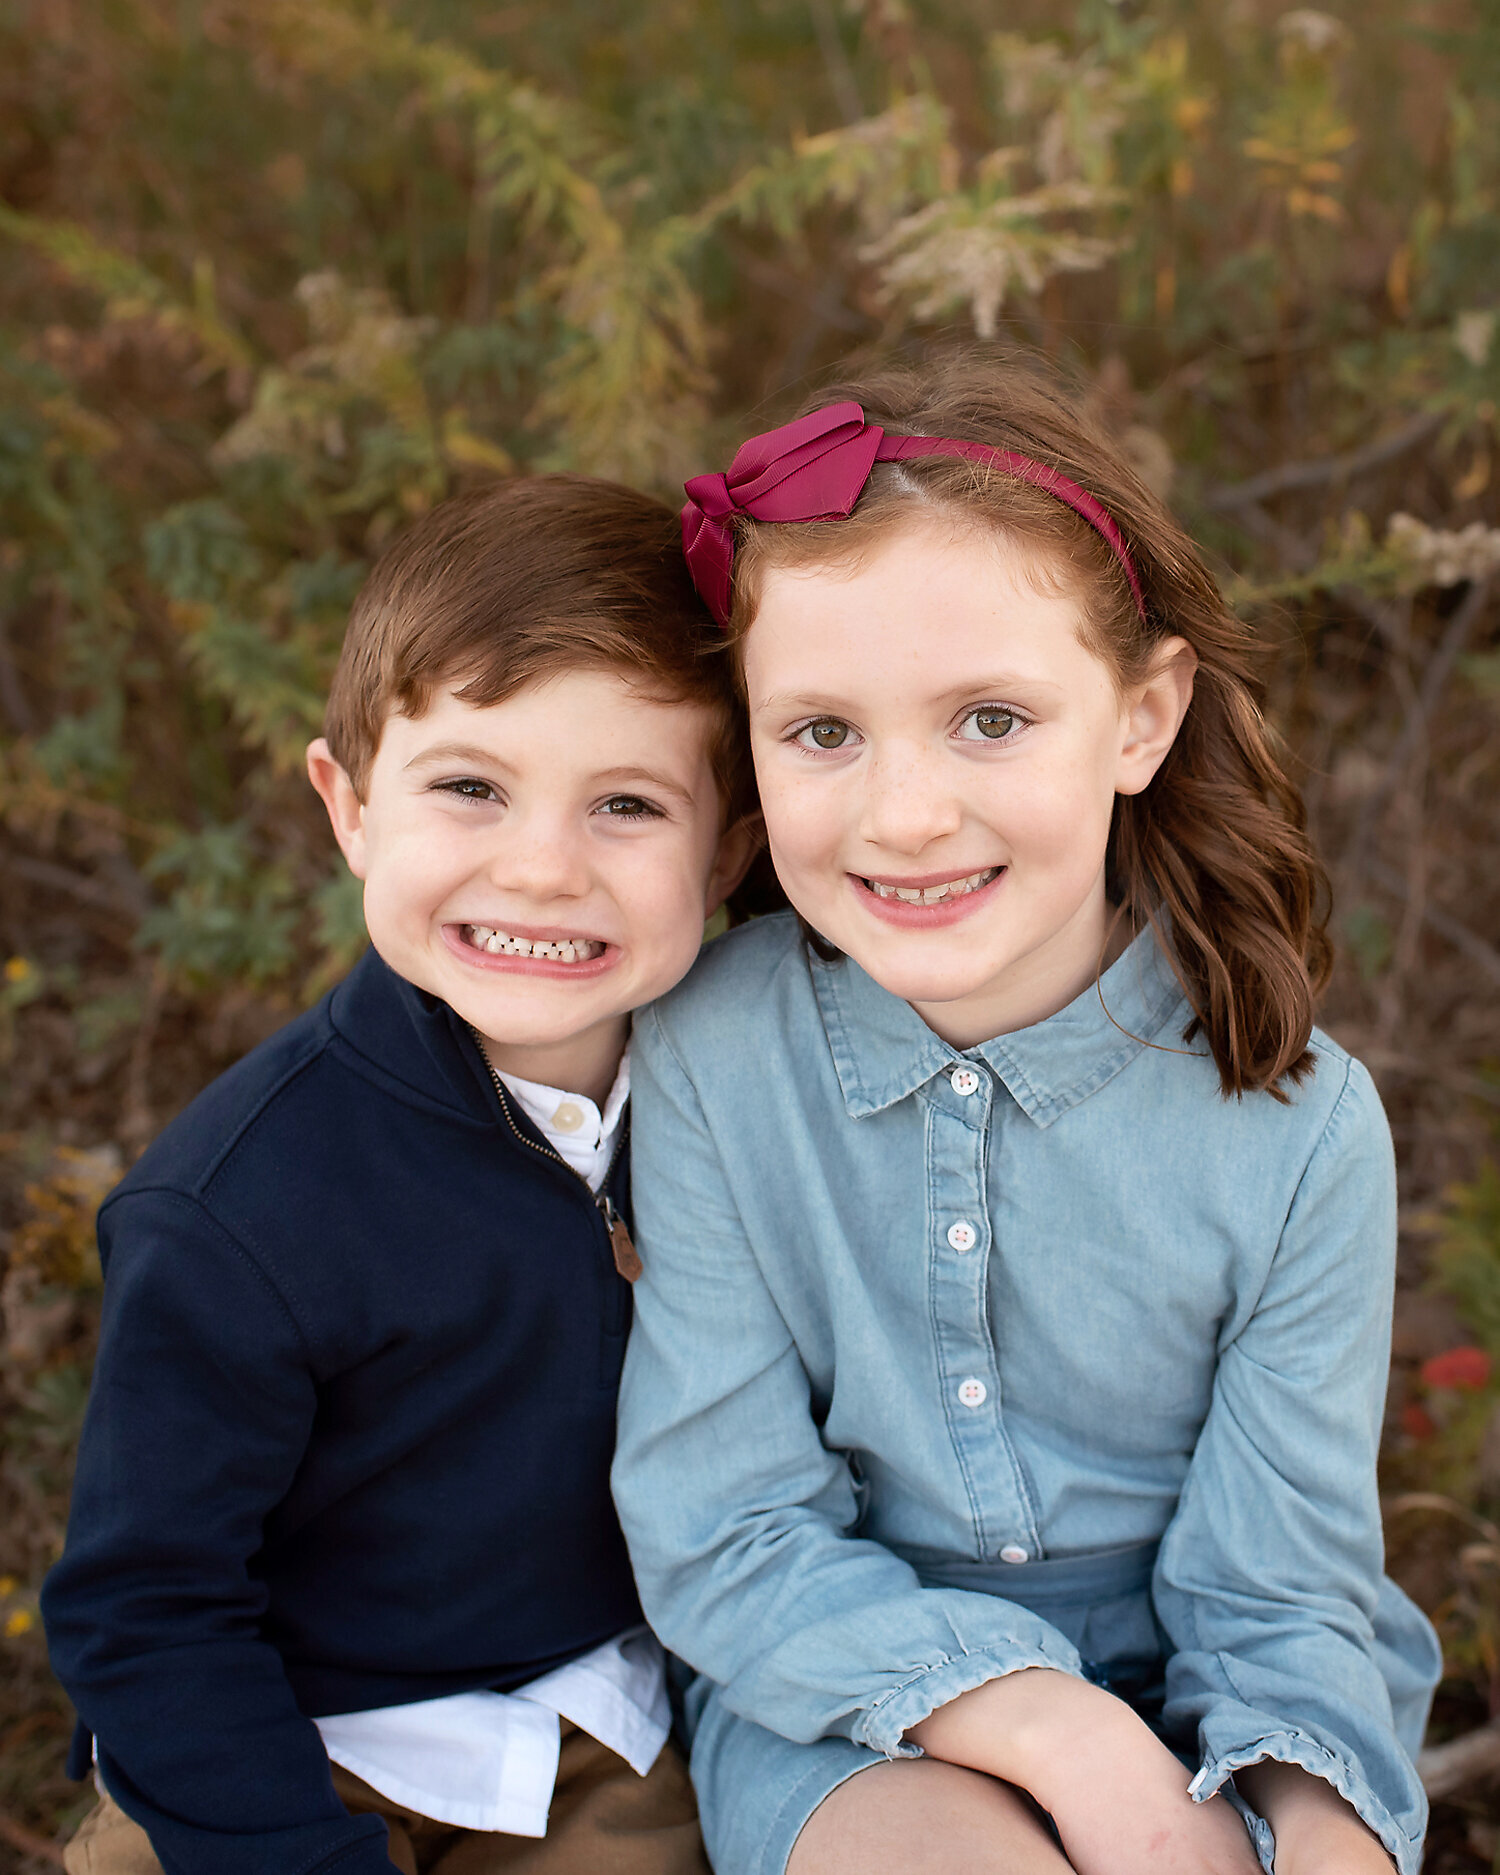 Brother and sister sitting close and smiling at their outdoor photo shoot.